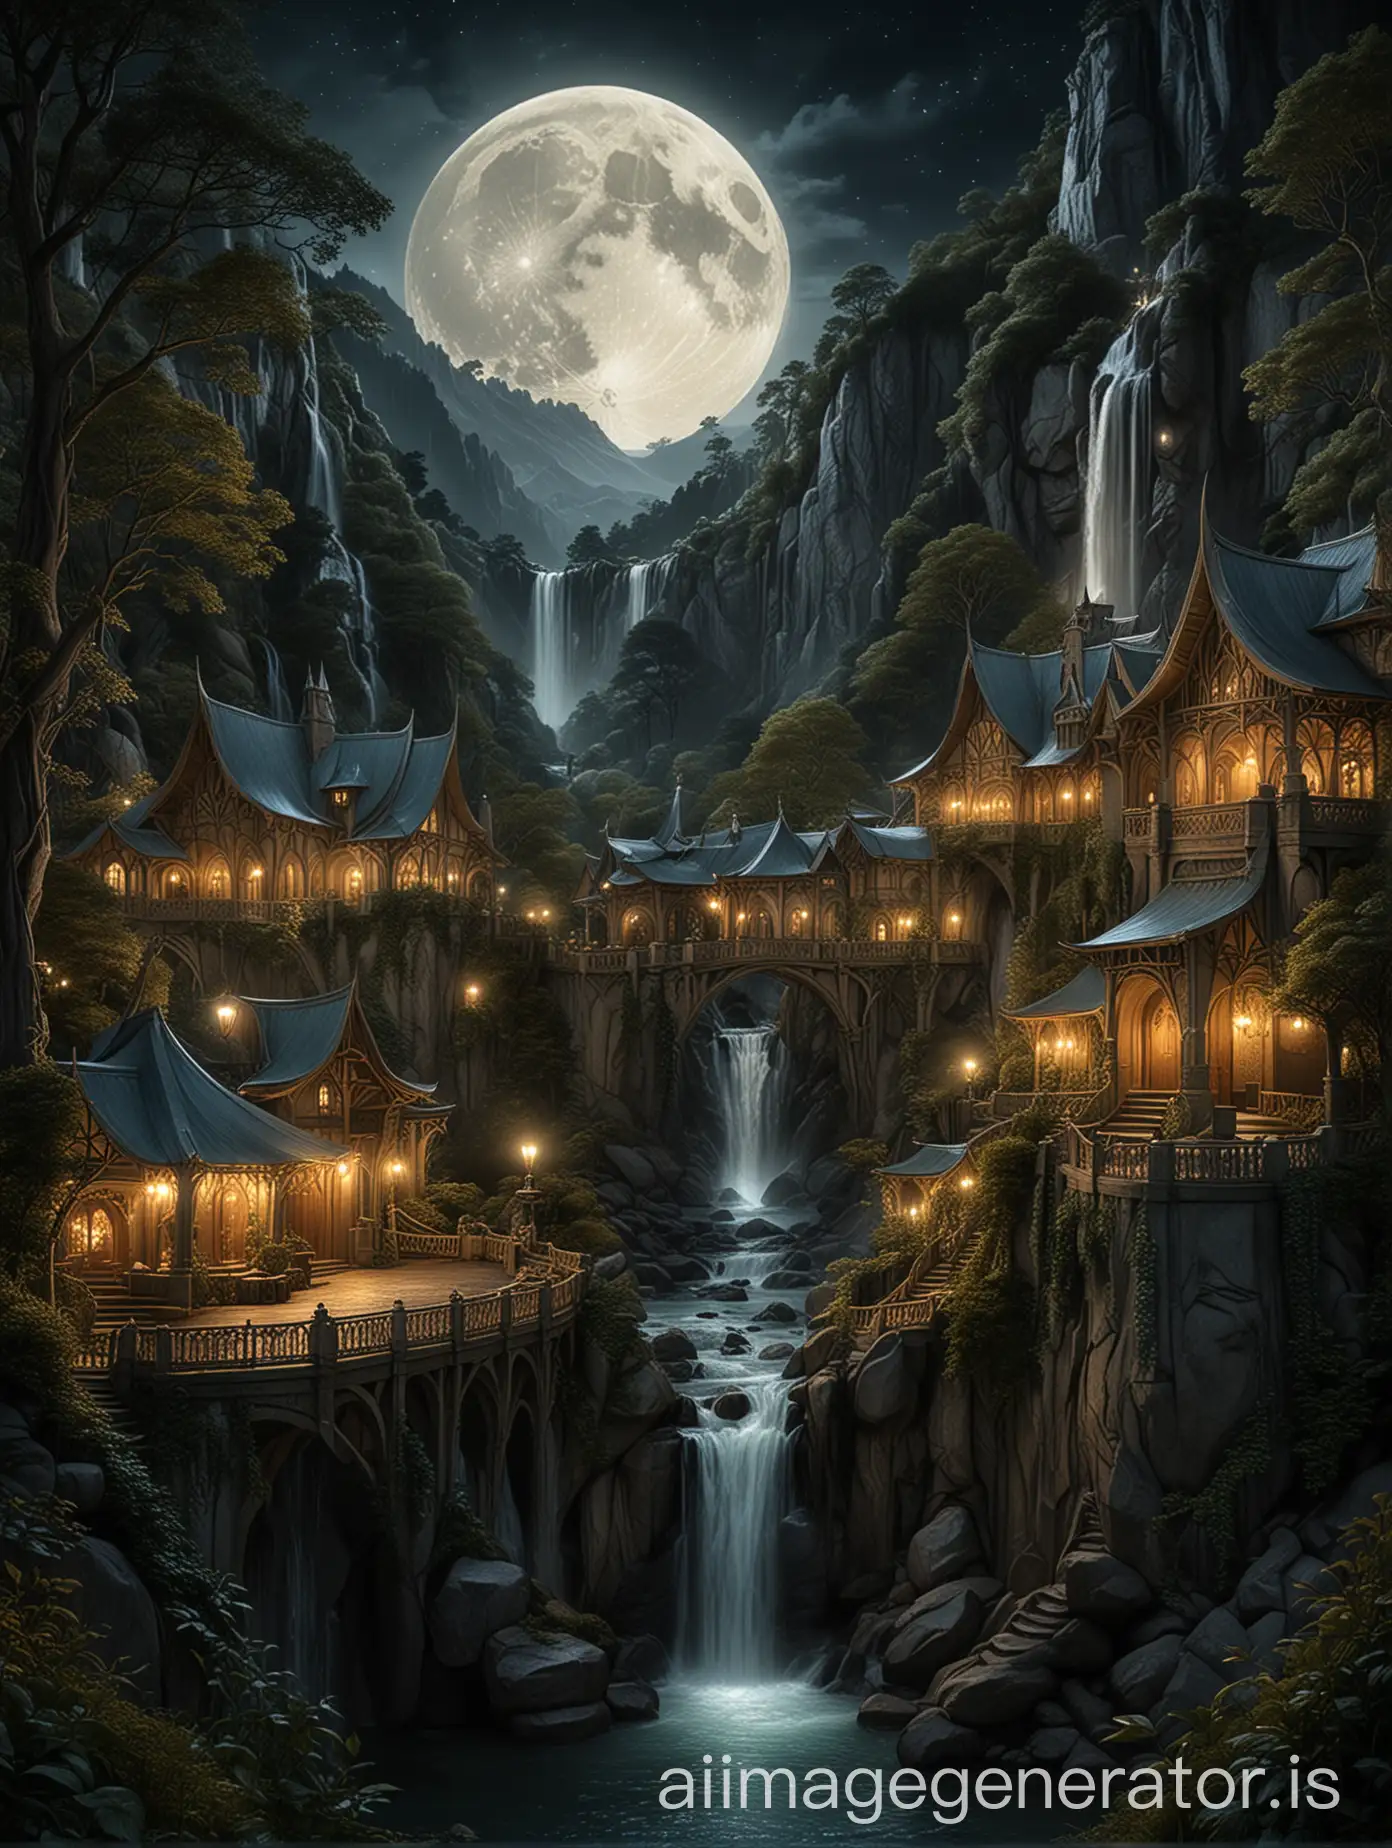 Rivendell illuminated by moonlight, with elven buildings glowing softly at night, waterfalls shimmering under the moon's glow, and a serene and mysterious atmosphere